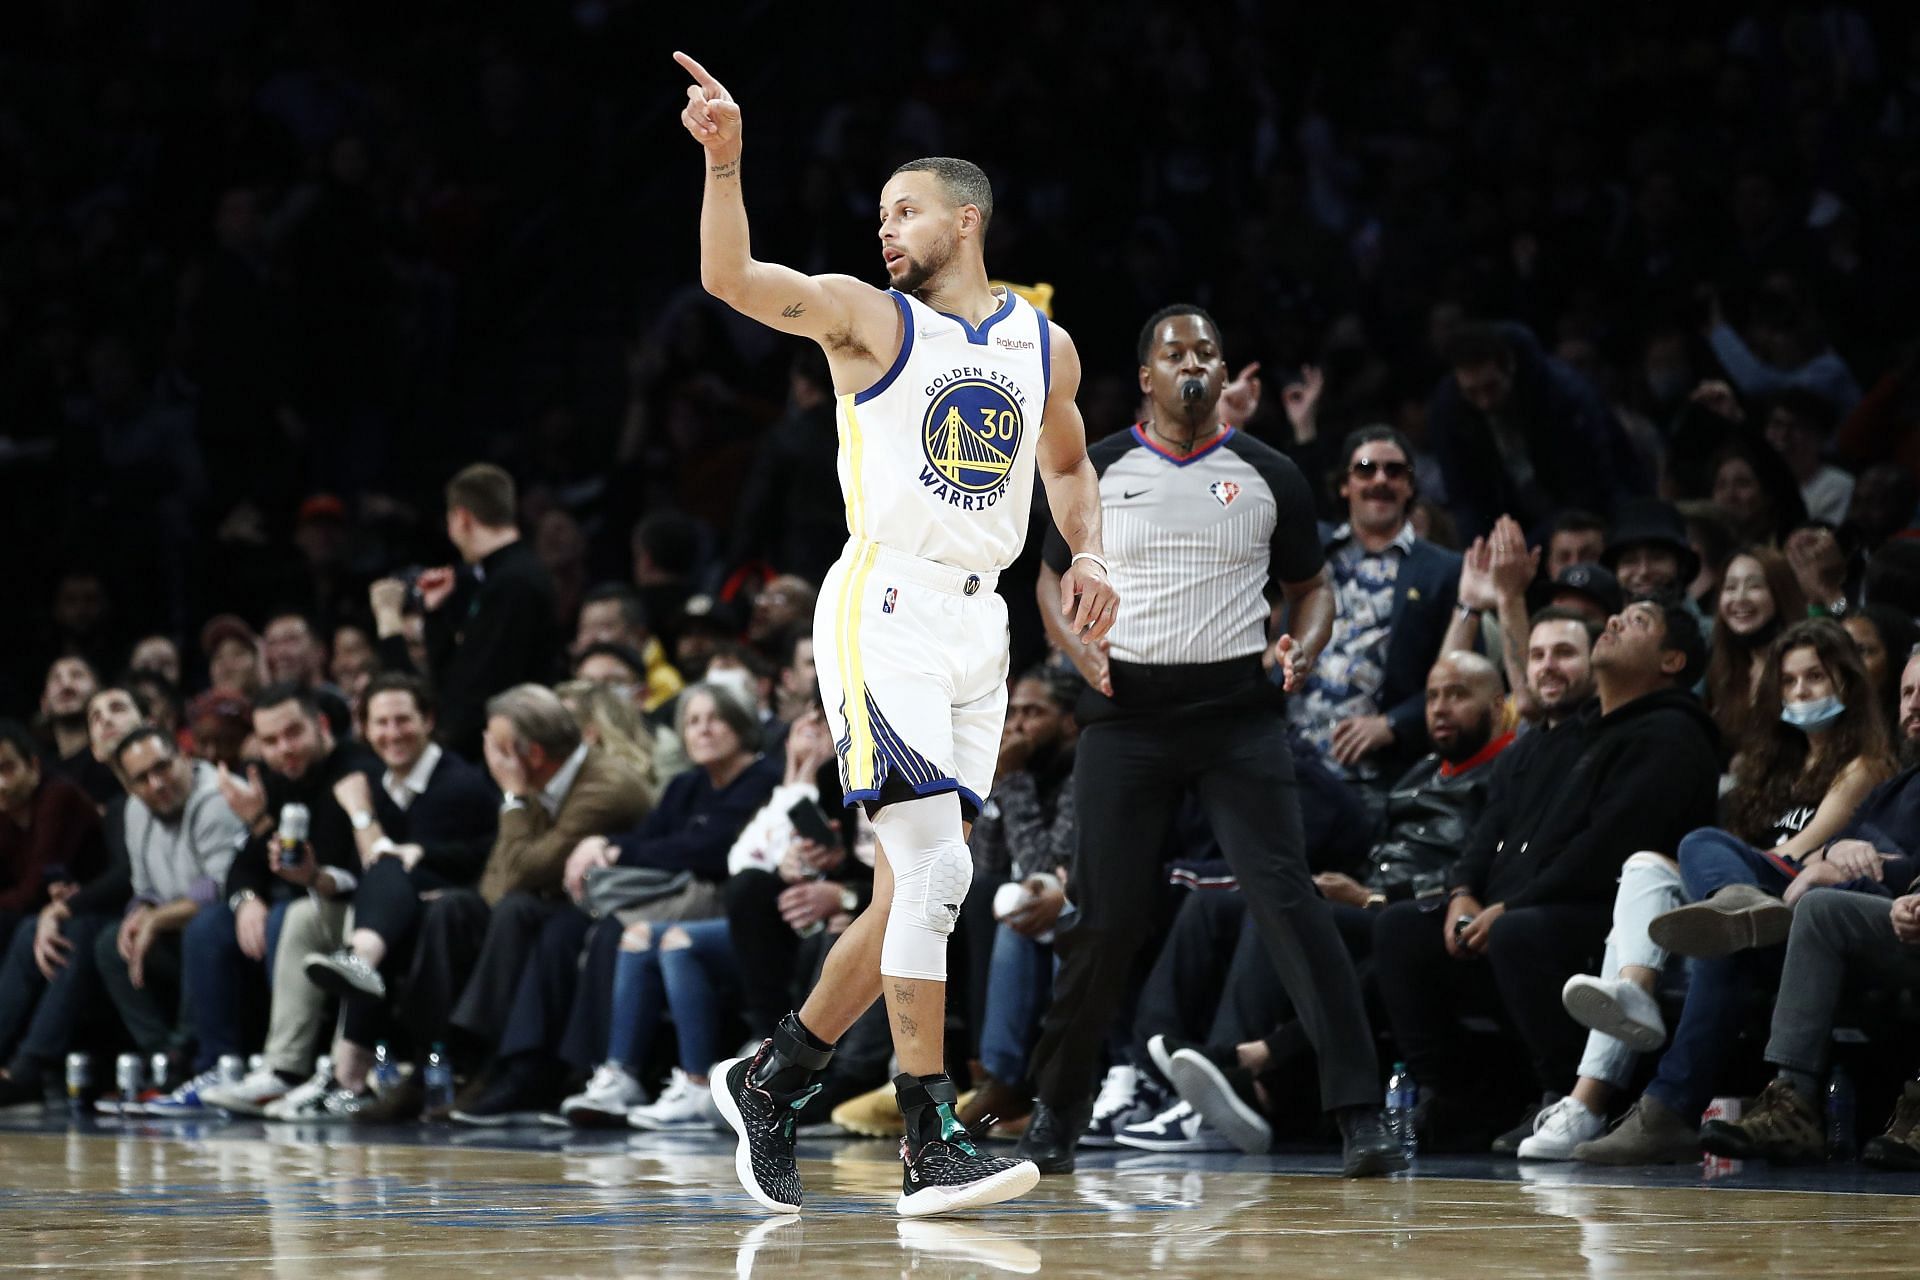 Stephen Curry&#039;s sizzling shooting was acknowledged by the Brooklyn Nets crowd despite the home team&#039;s loss to the Golden State Warriors.